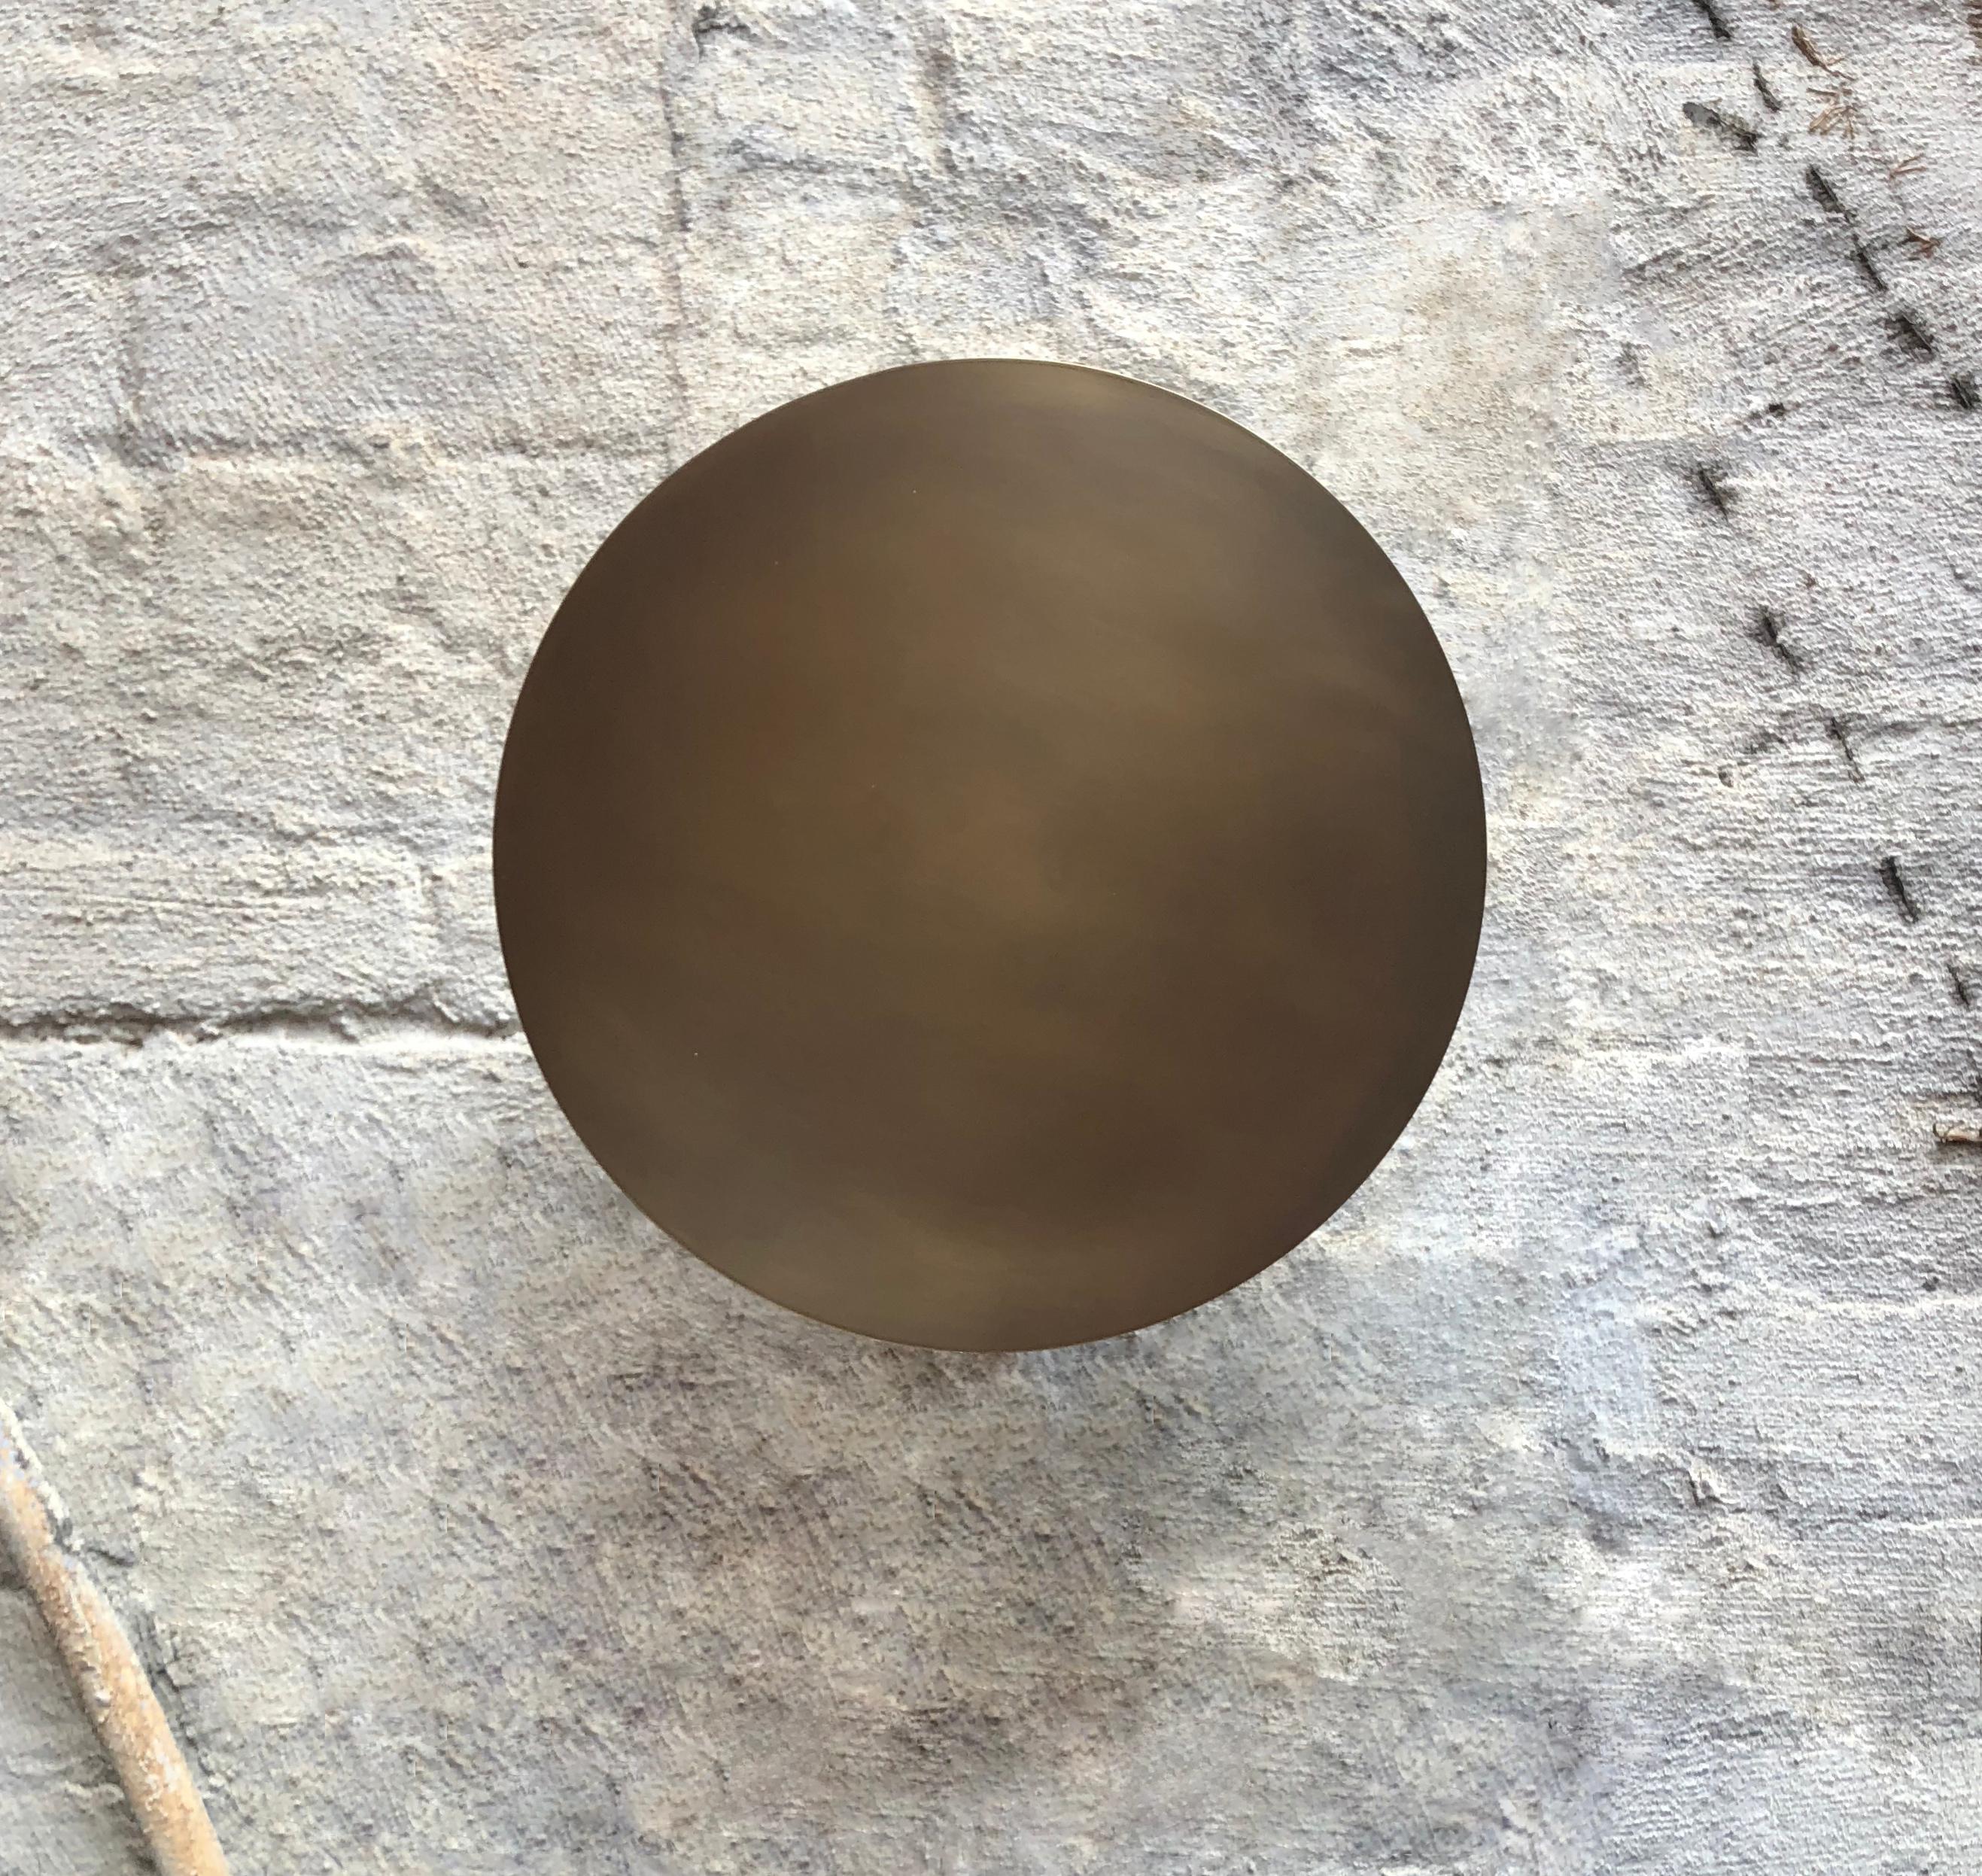 Kurt Versen designed lights that can be wall or ceiling mounted, each with a round, straight-edge, patinated solid brass shade that is enameled on the interiors side and is affixed onto the white enameled brass cylindrical stem and round mounting